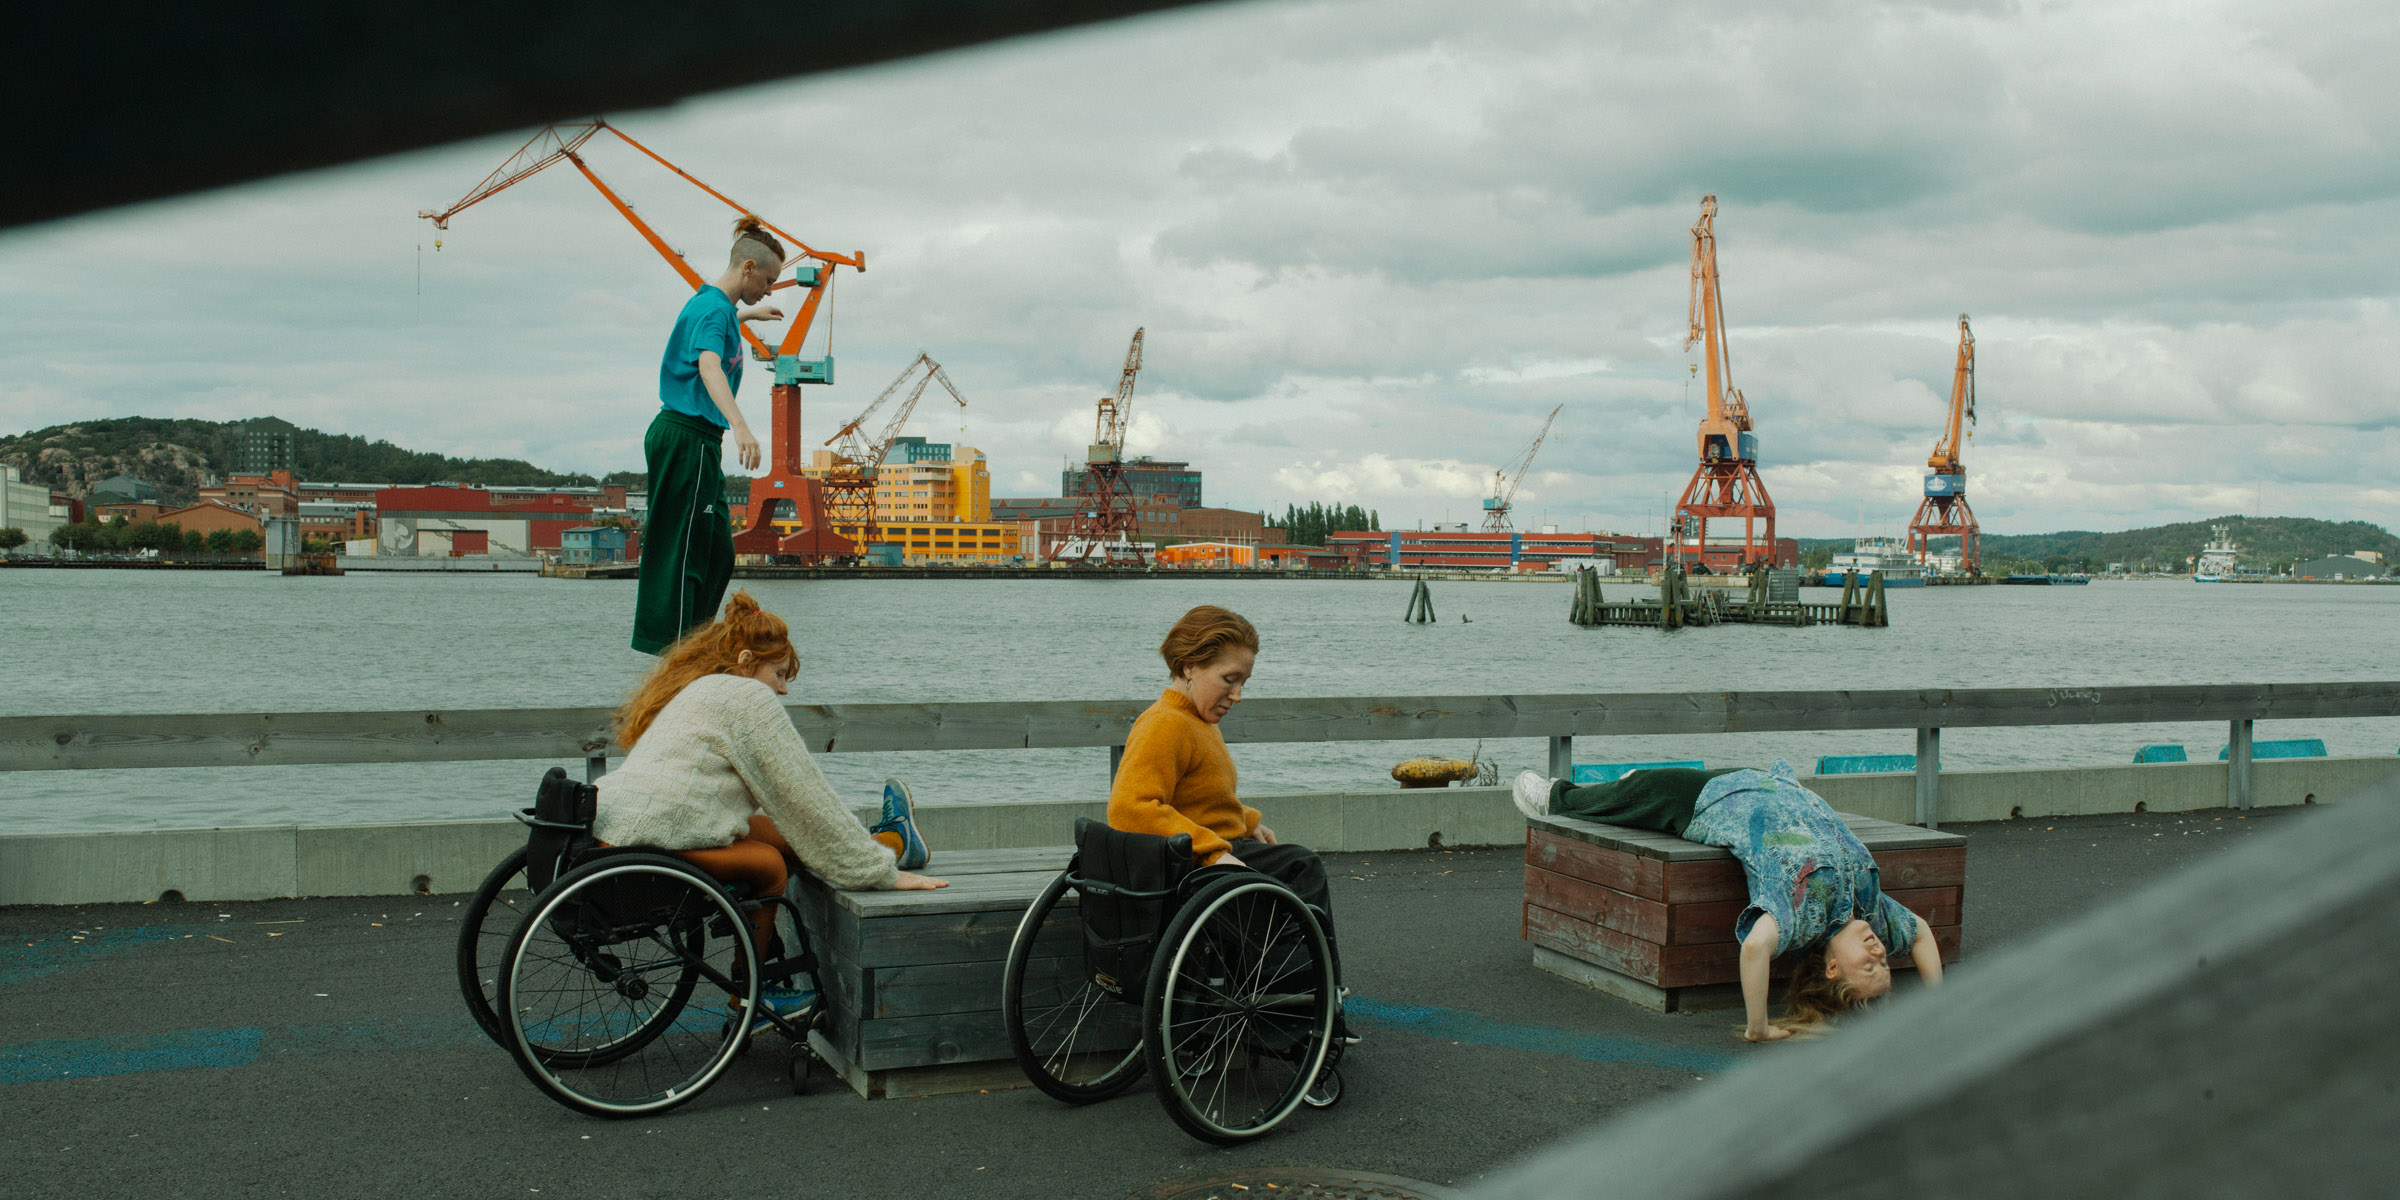 In the picture we see four dancers. They are outdoors. On a wharf by a river. There are cranes in the background. Two dancers sit in wheelchairs, one of whom has one leg up on a wooden box. A third dancer lies on another wooden box and a fourth dancer balances on a concrete edge.Photo Malin Johansson